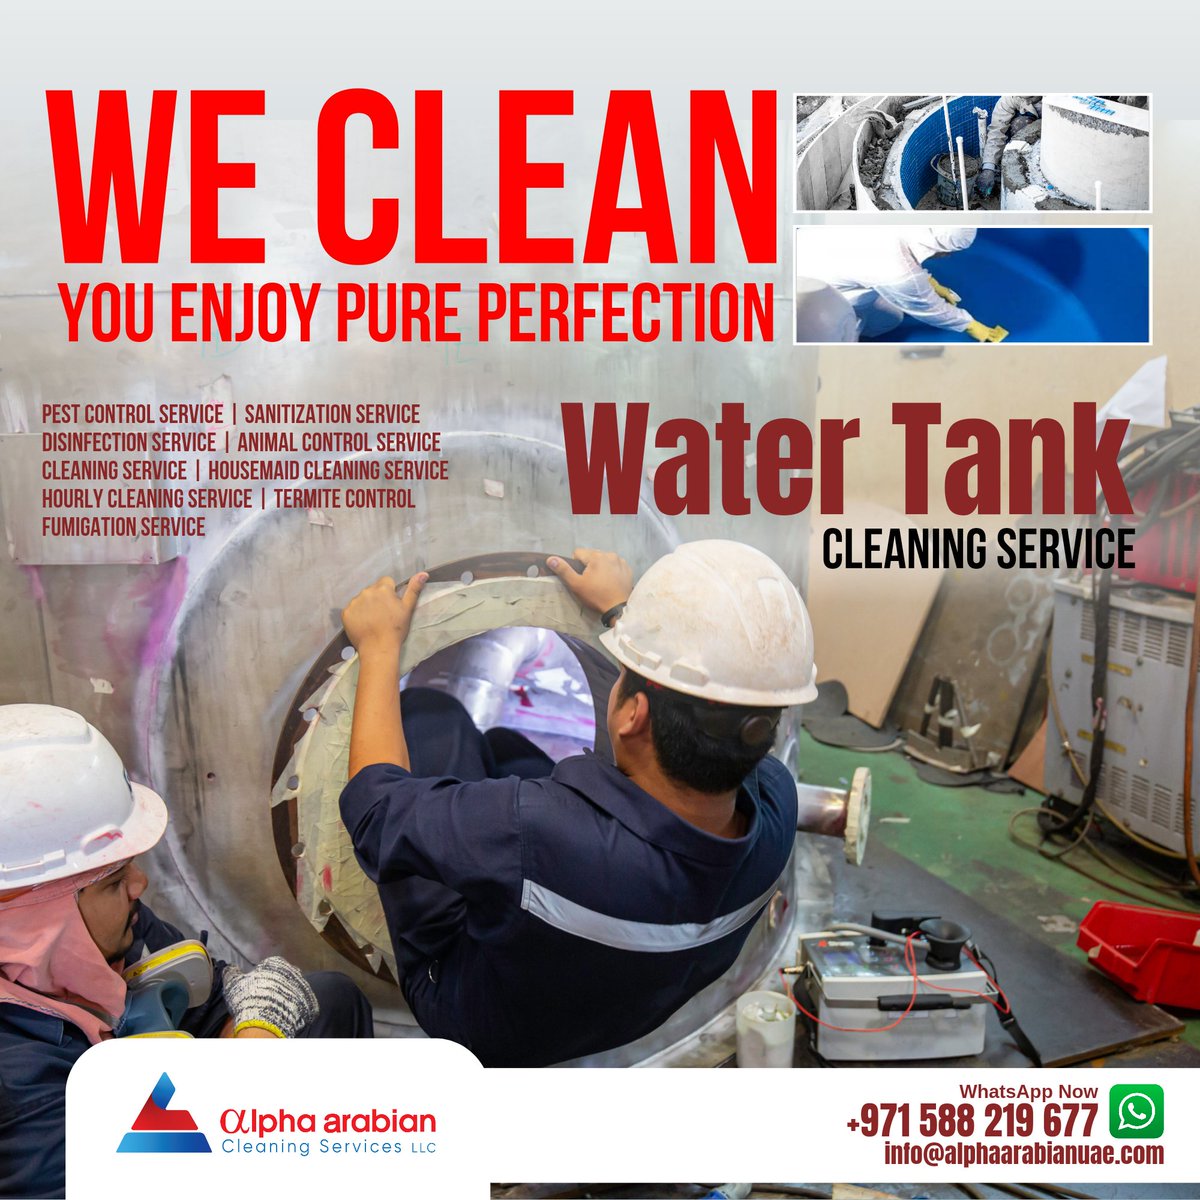 Experience the sparkle and shine with Alpha Arabian top-notch water tank cleaning service! 
 Call: +971588219677 or Log on to: alphaarabianuae.com/water-tank-cle…

#watertankcleaning #watertankcleaningservice #sintextank #watercleaning #cleaningservices #cleaningservicedubai #dubai